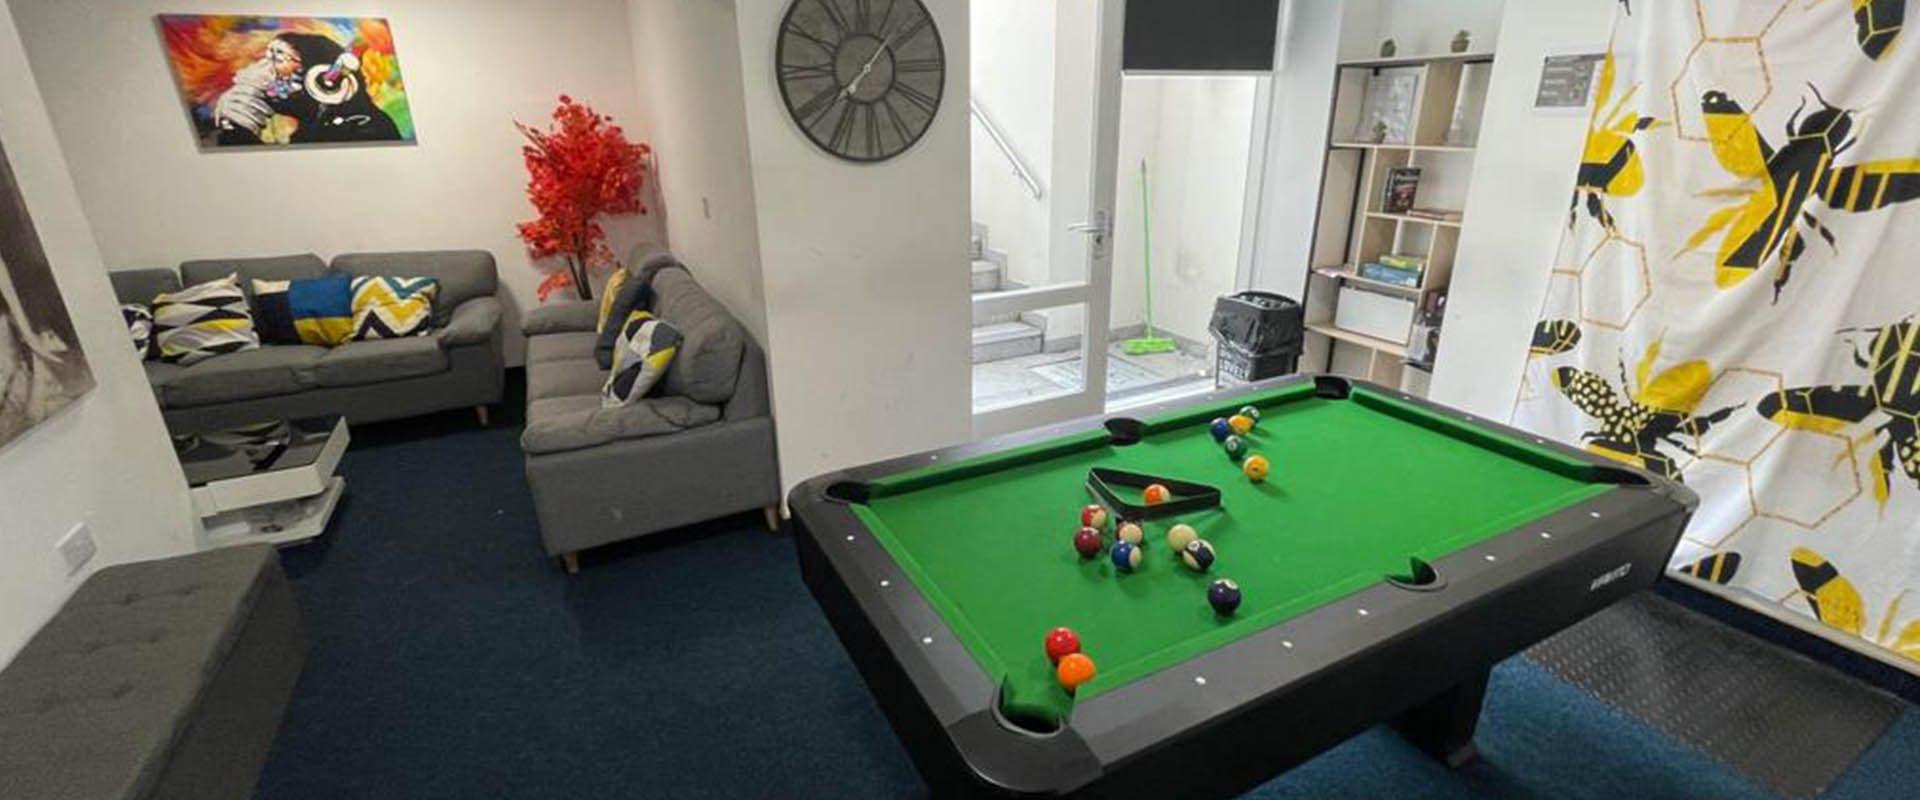 Take a break in our relaxing common room